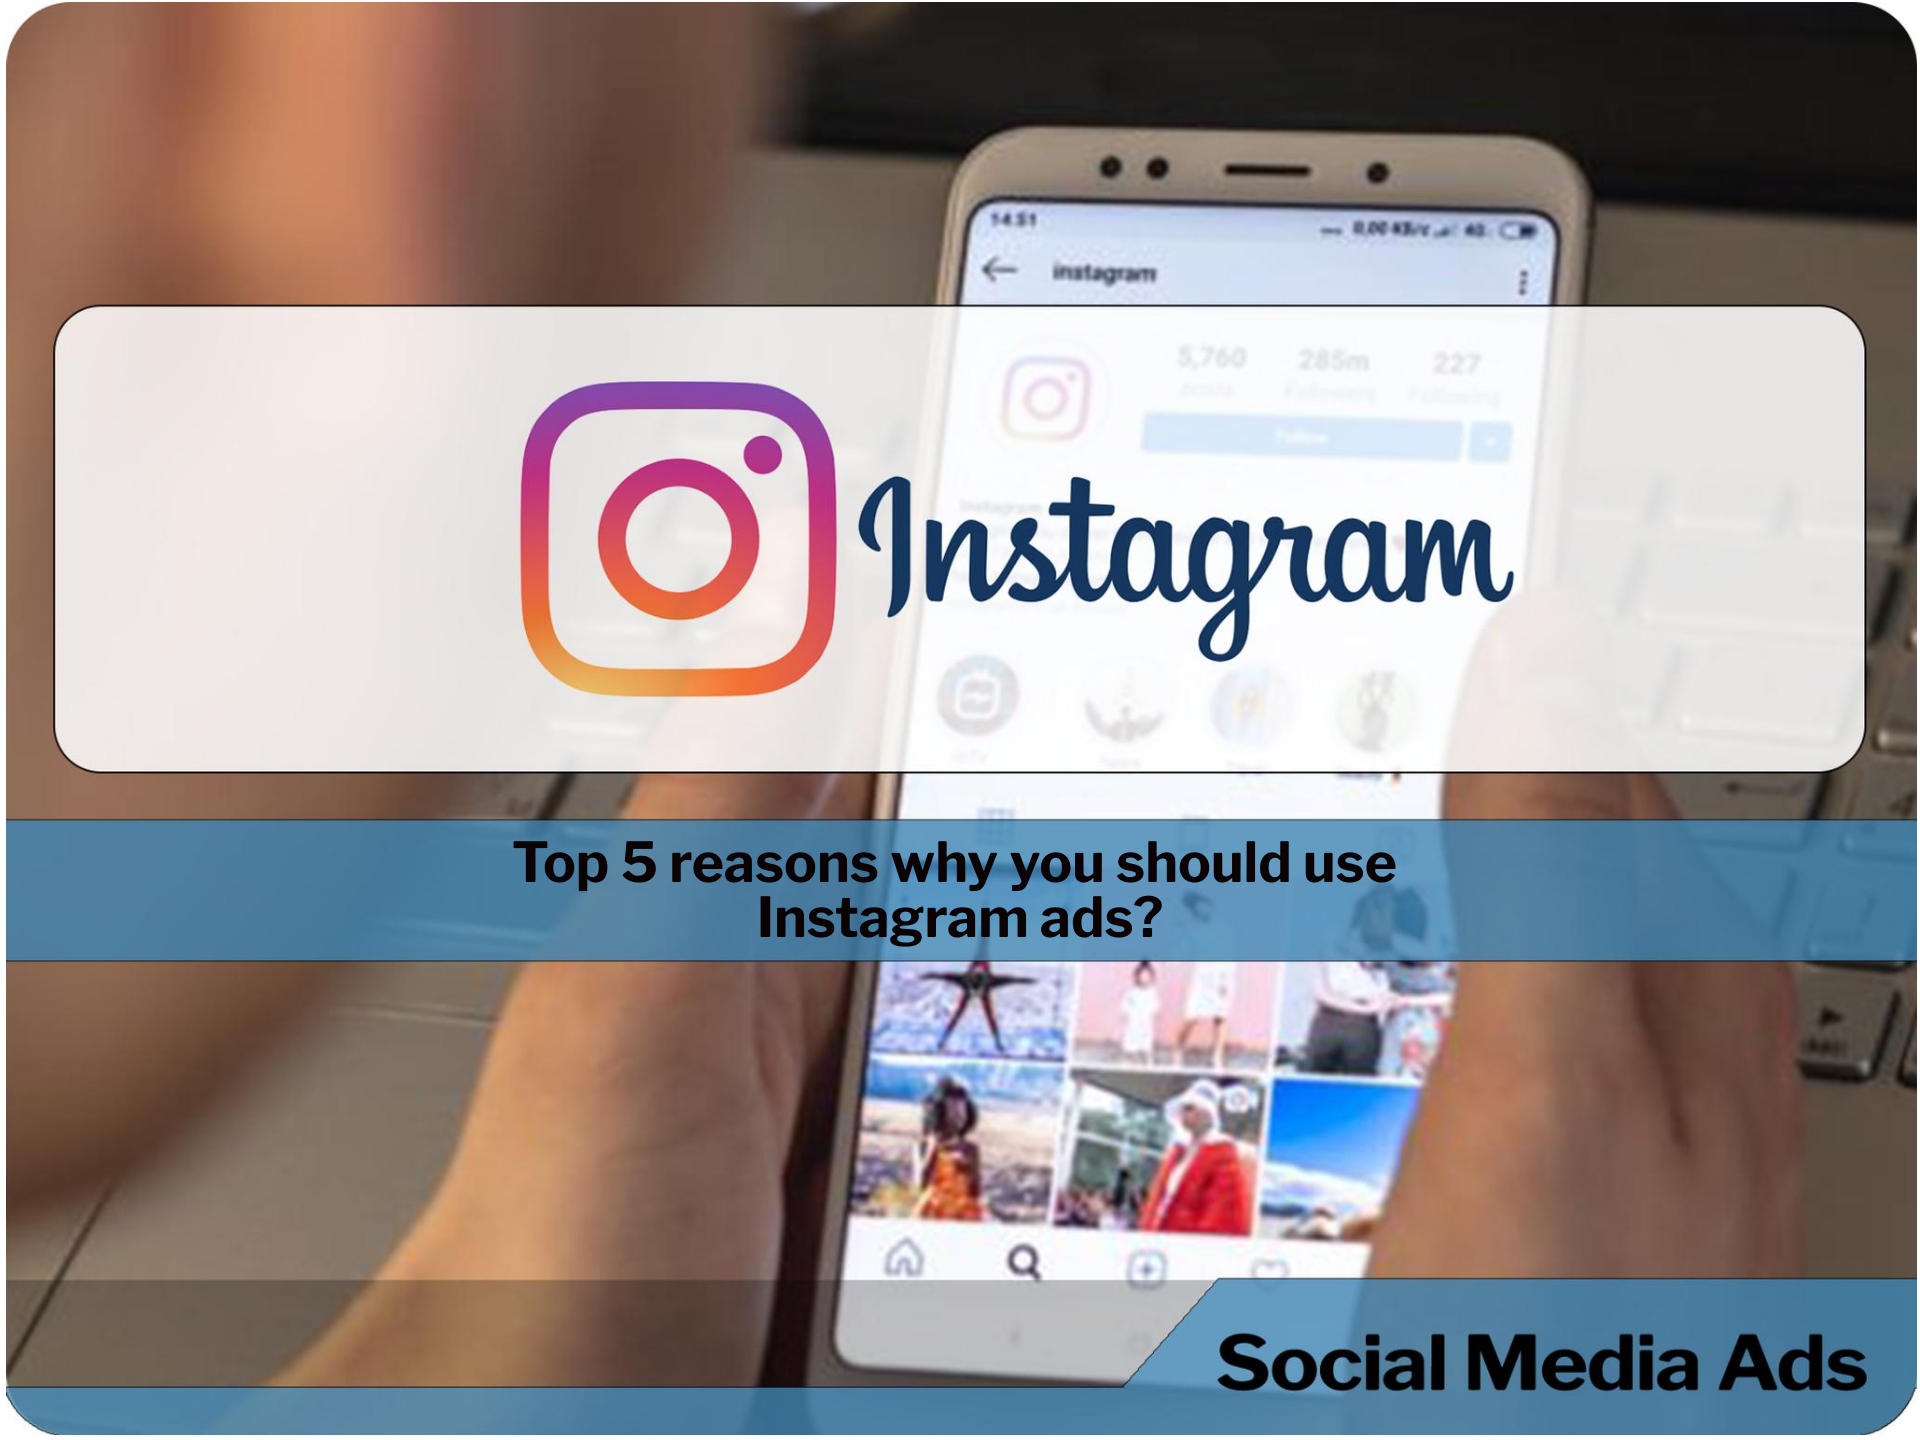 Top 5 reasons why you should use Instagram ads?